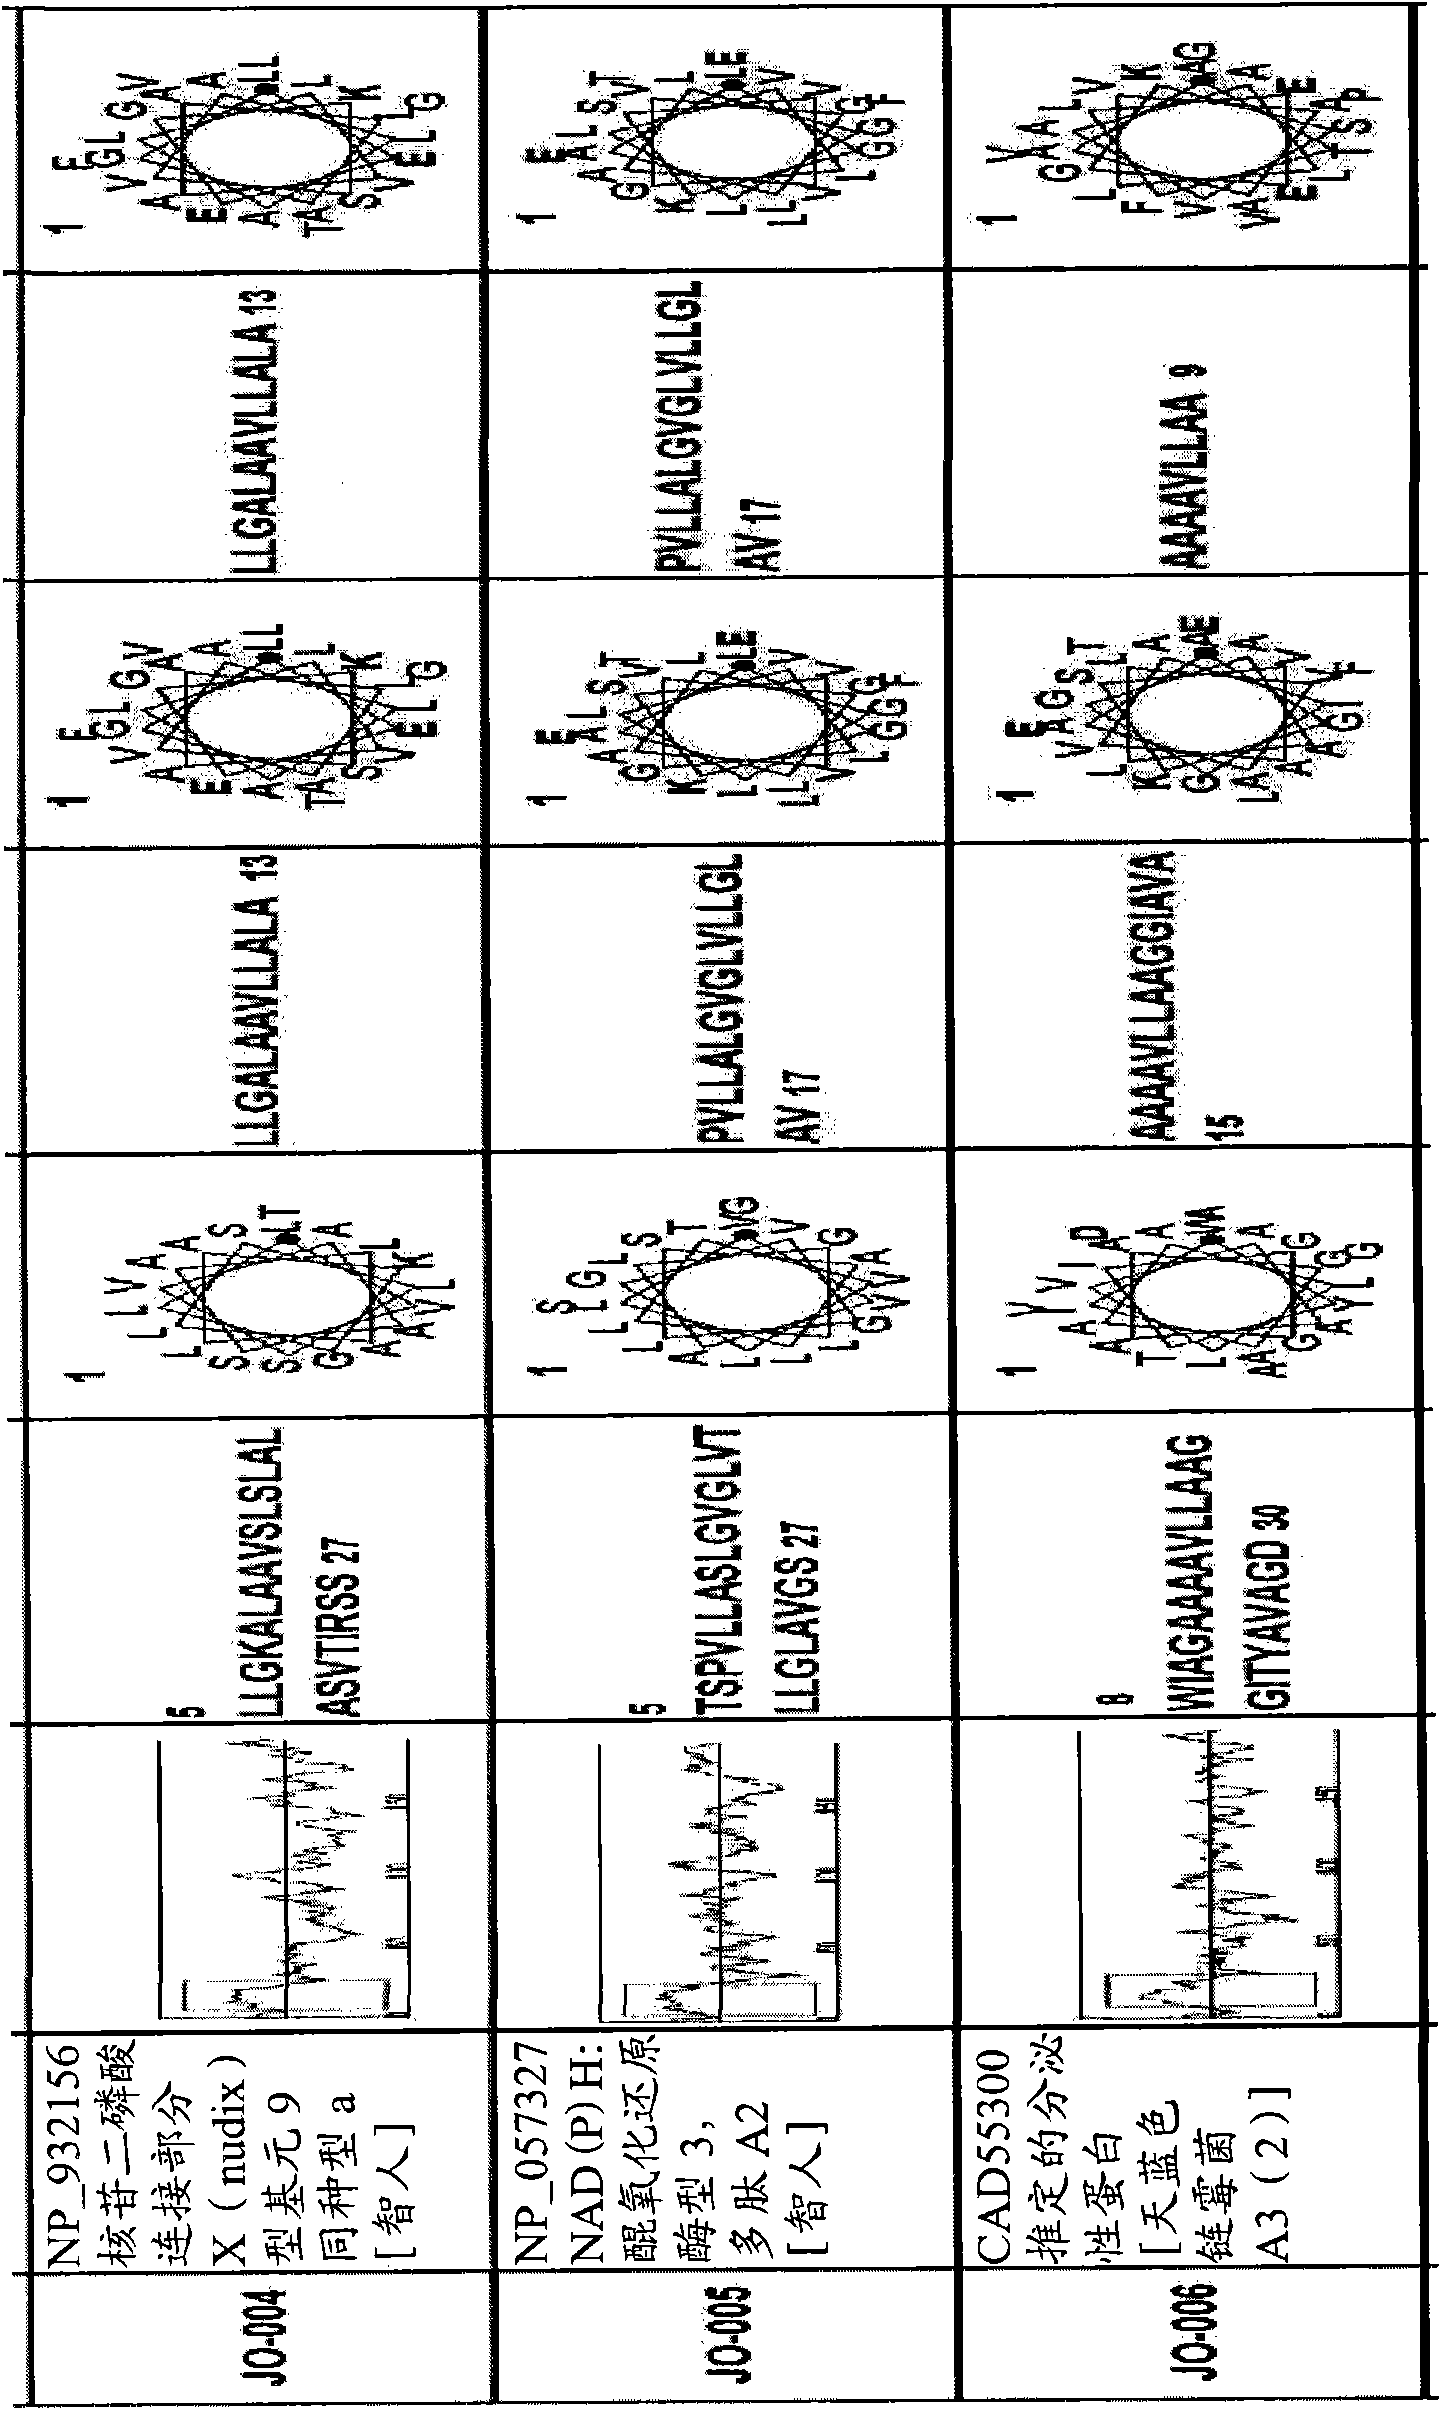 Novel macromolecule transduction domains and methods for identification and uses thereof